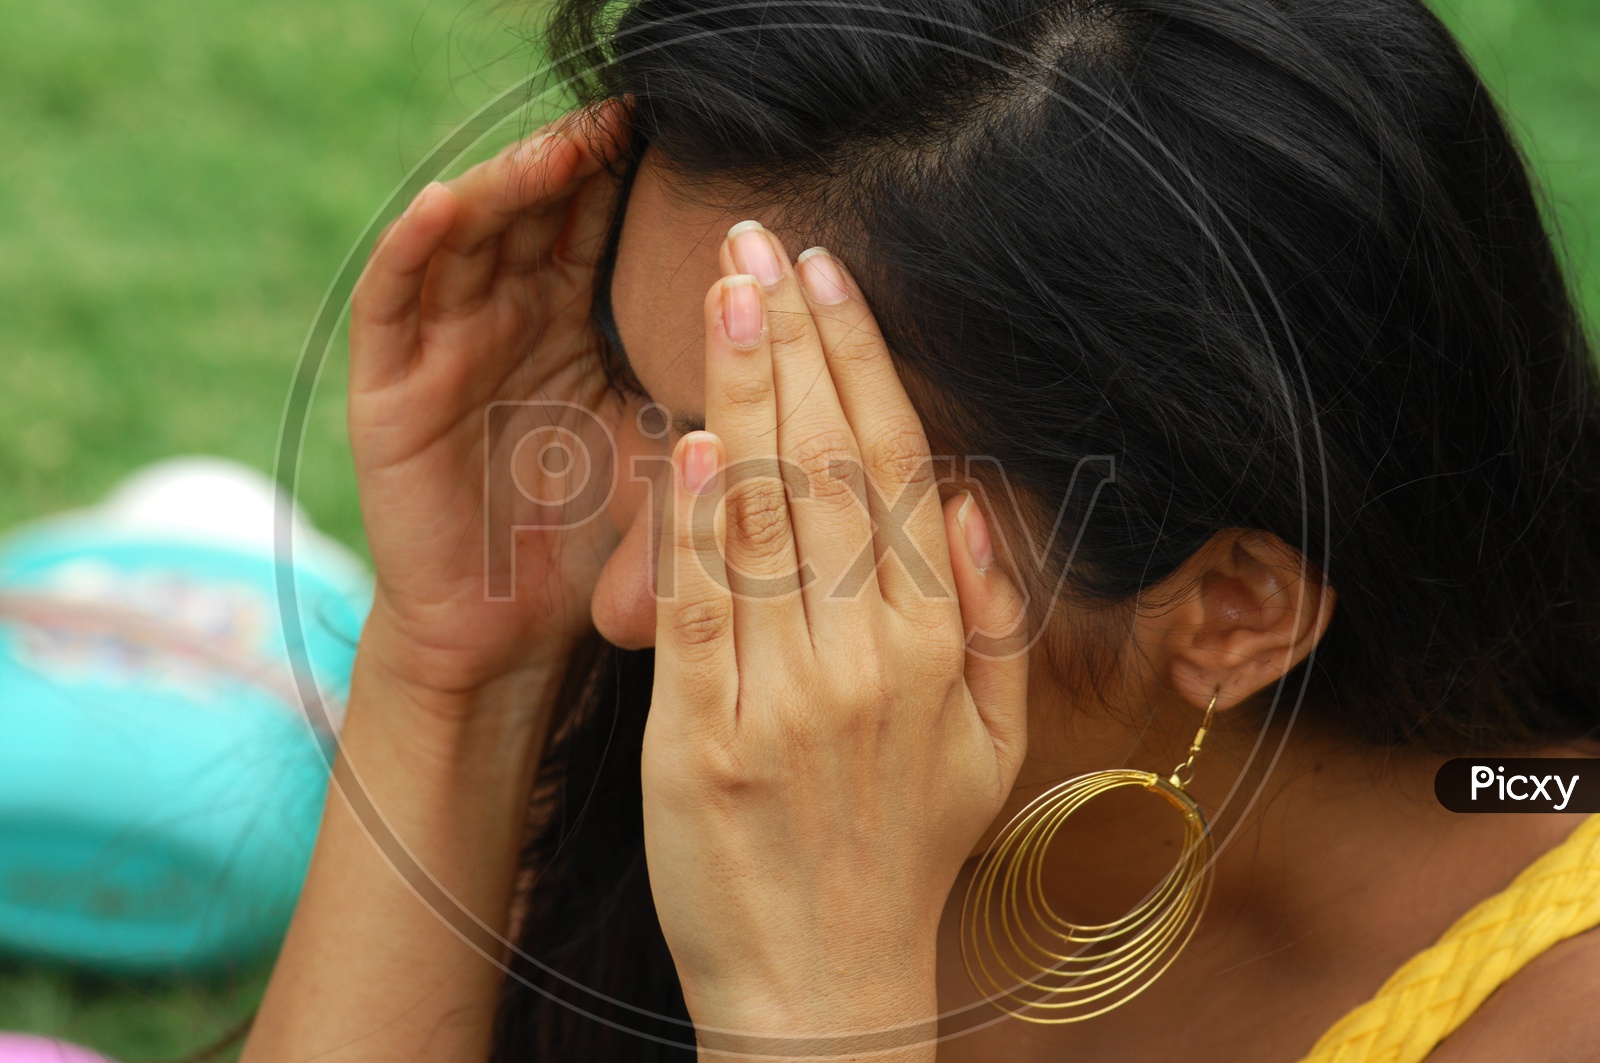 An Indian woman covering her face with hands